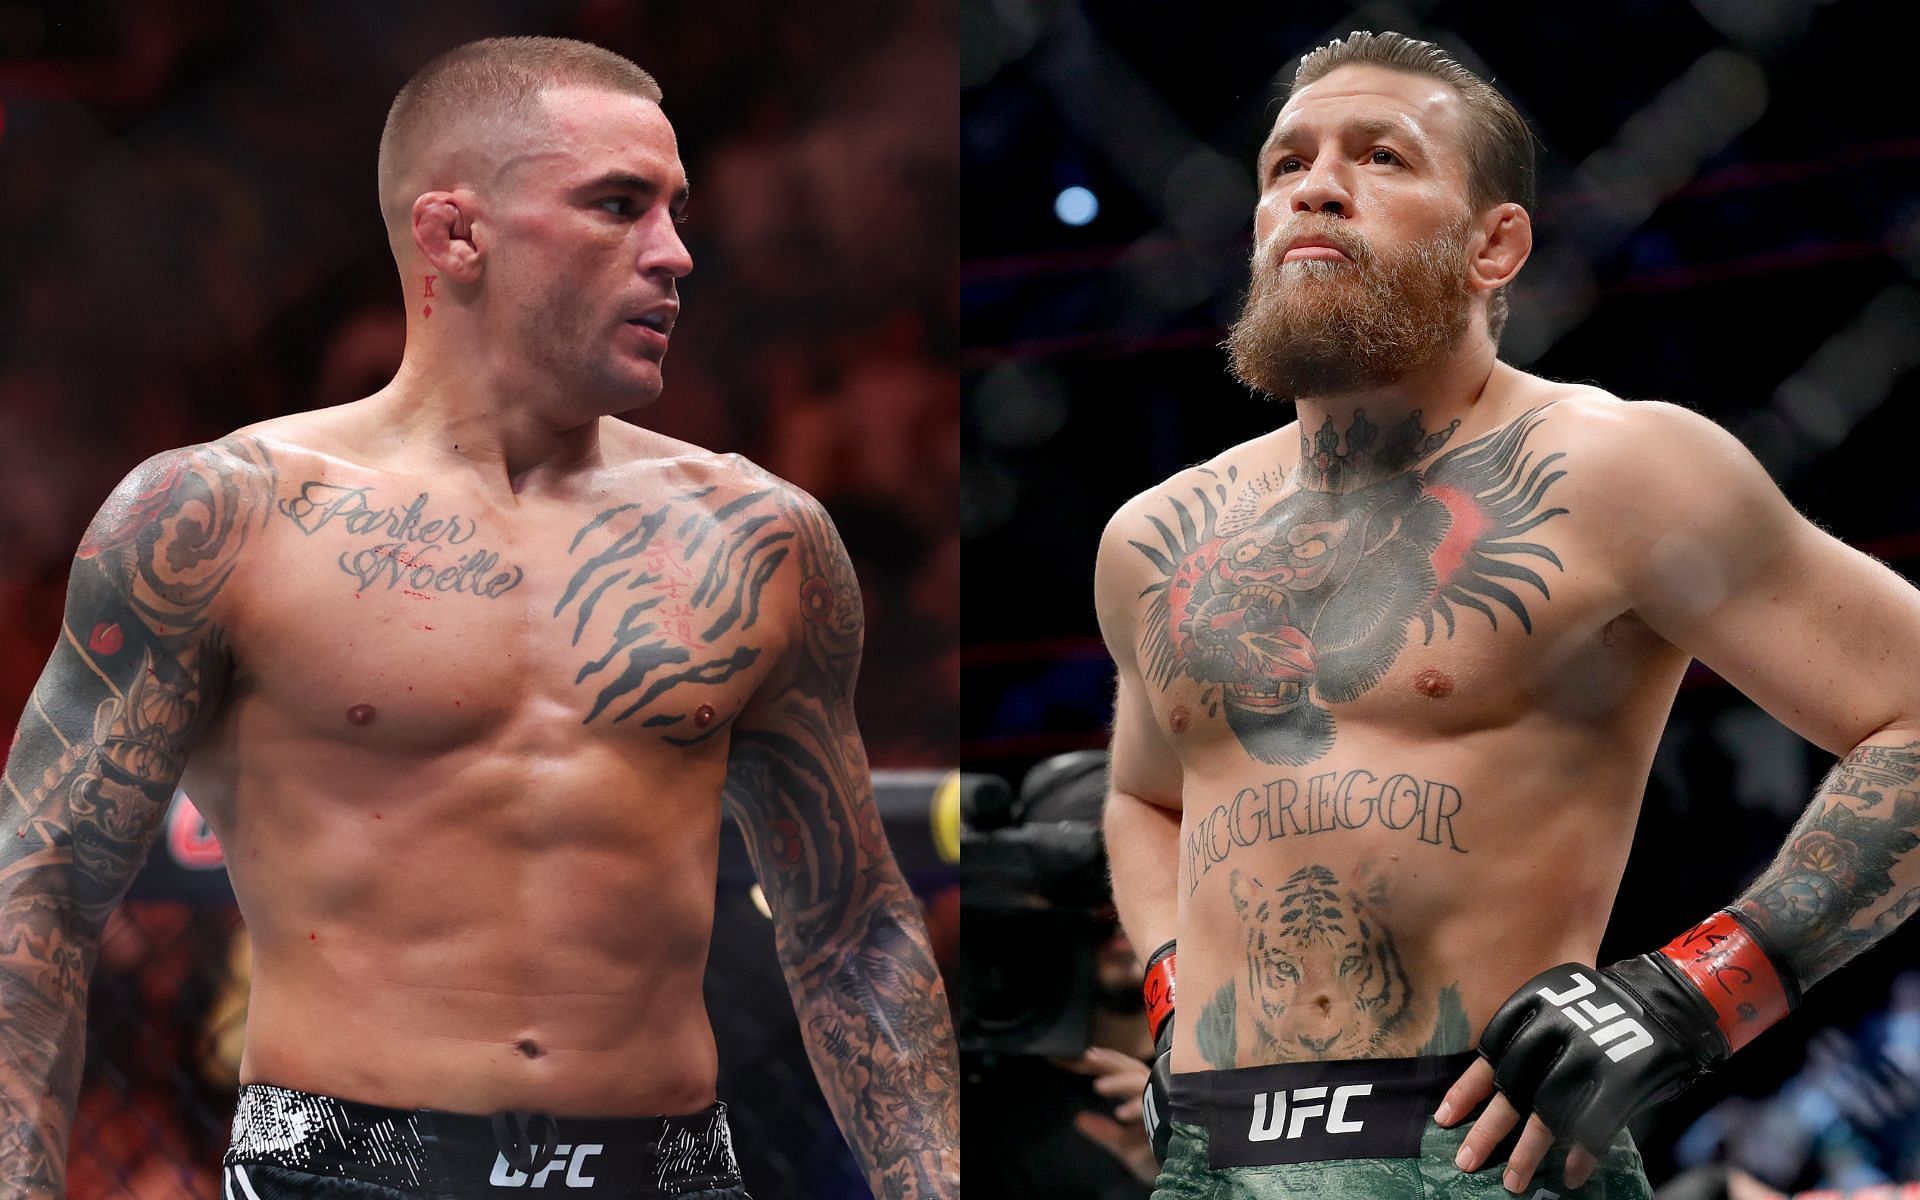 Dustin Poirier (left) and Conor McGregor (right) have long been at odds with one another [Images courtesy: Getty Images]